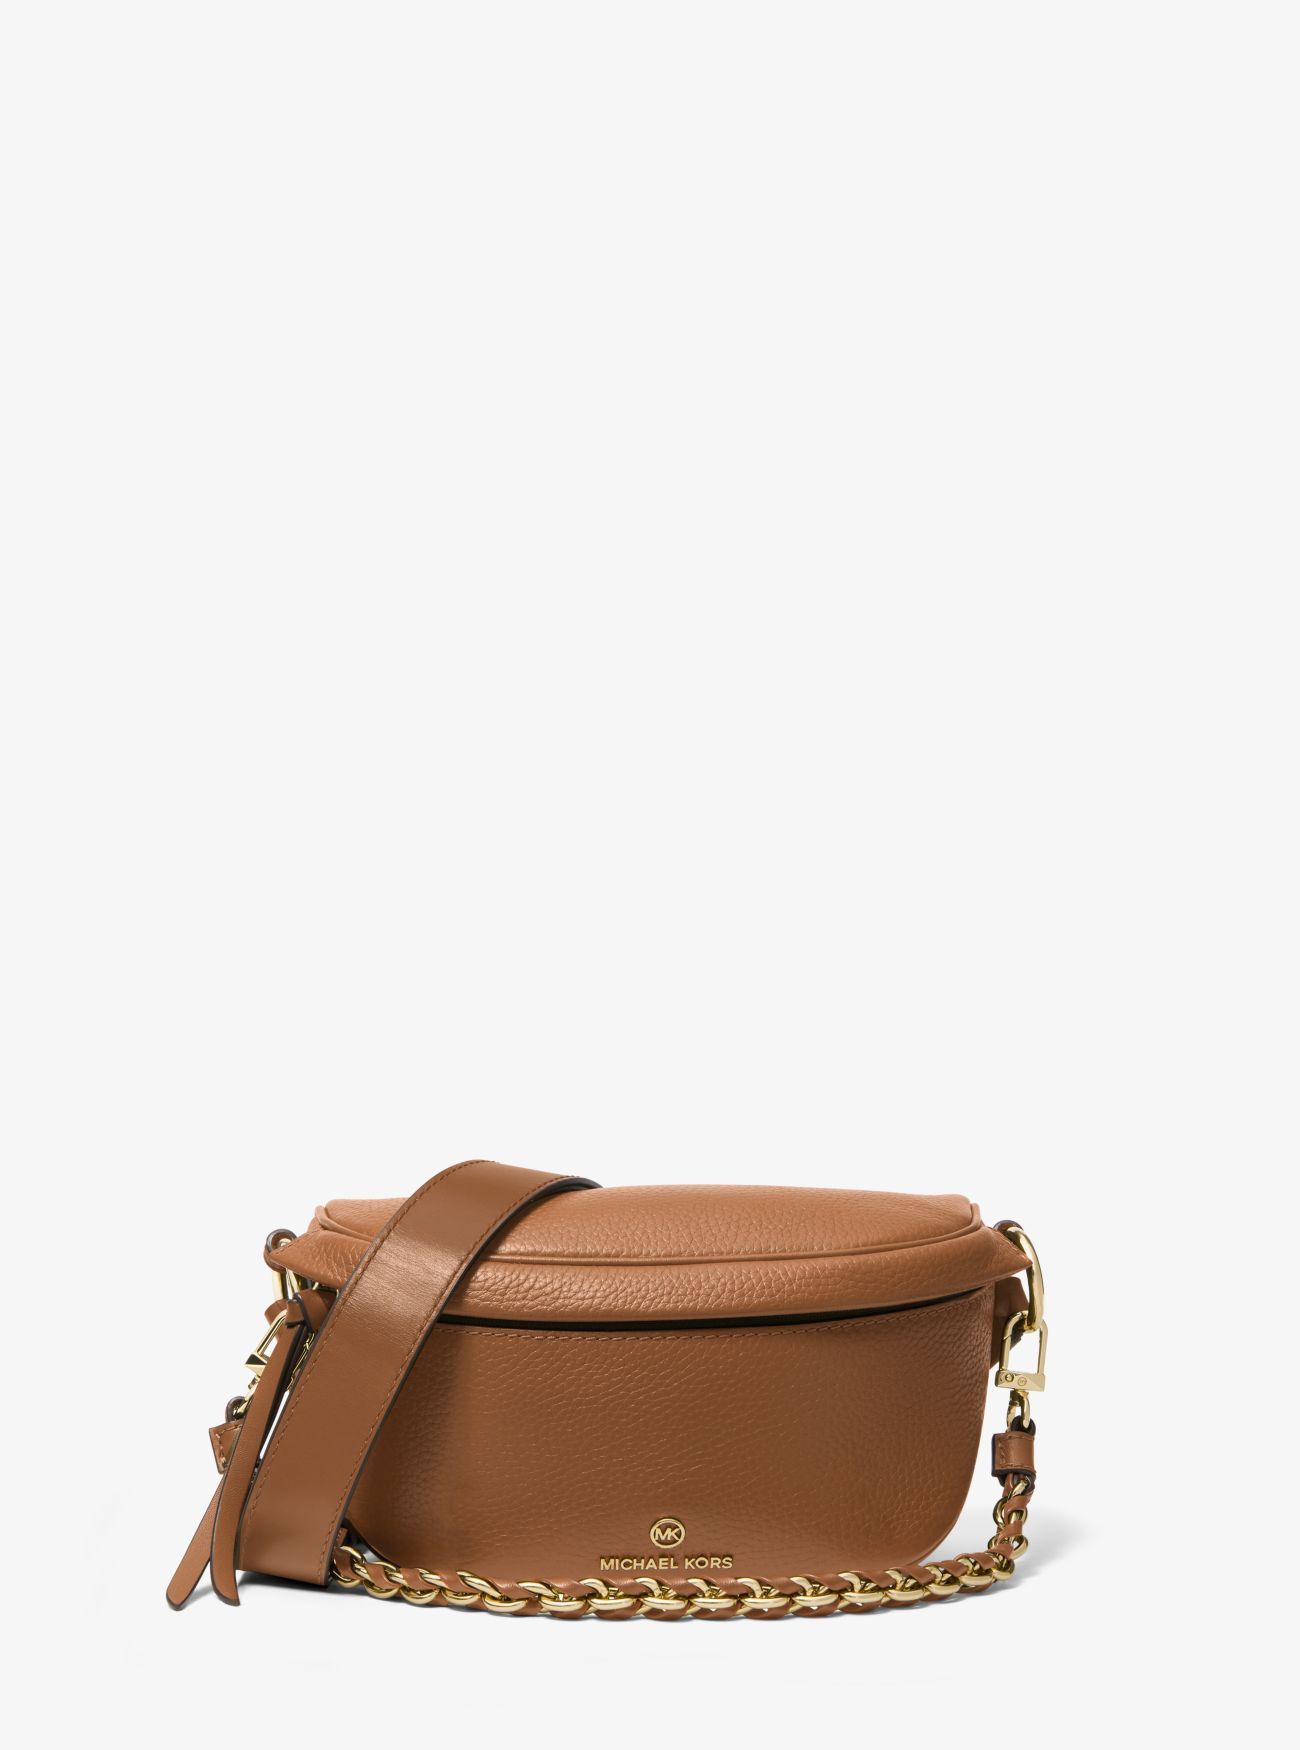 MK Slater Extra-Small Pebbled Leather Sling Pack - Brown - Michael Kors